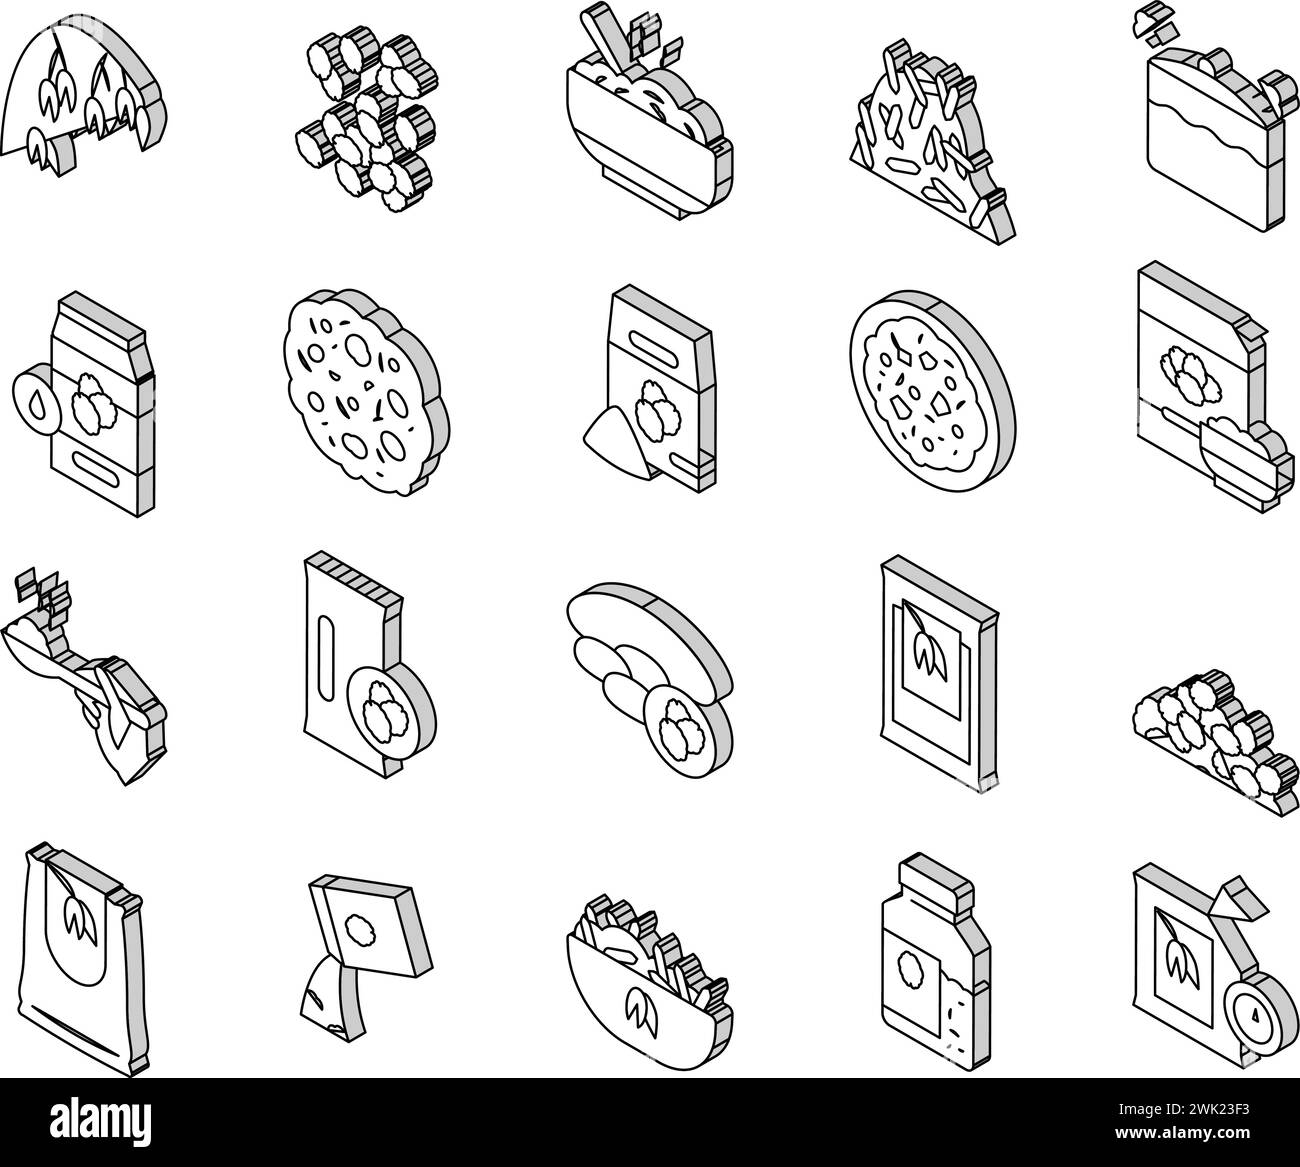 Oatmeal Nutrition Collection isometric icons set vector Stock Vector